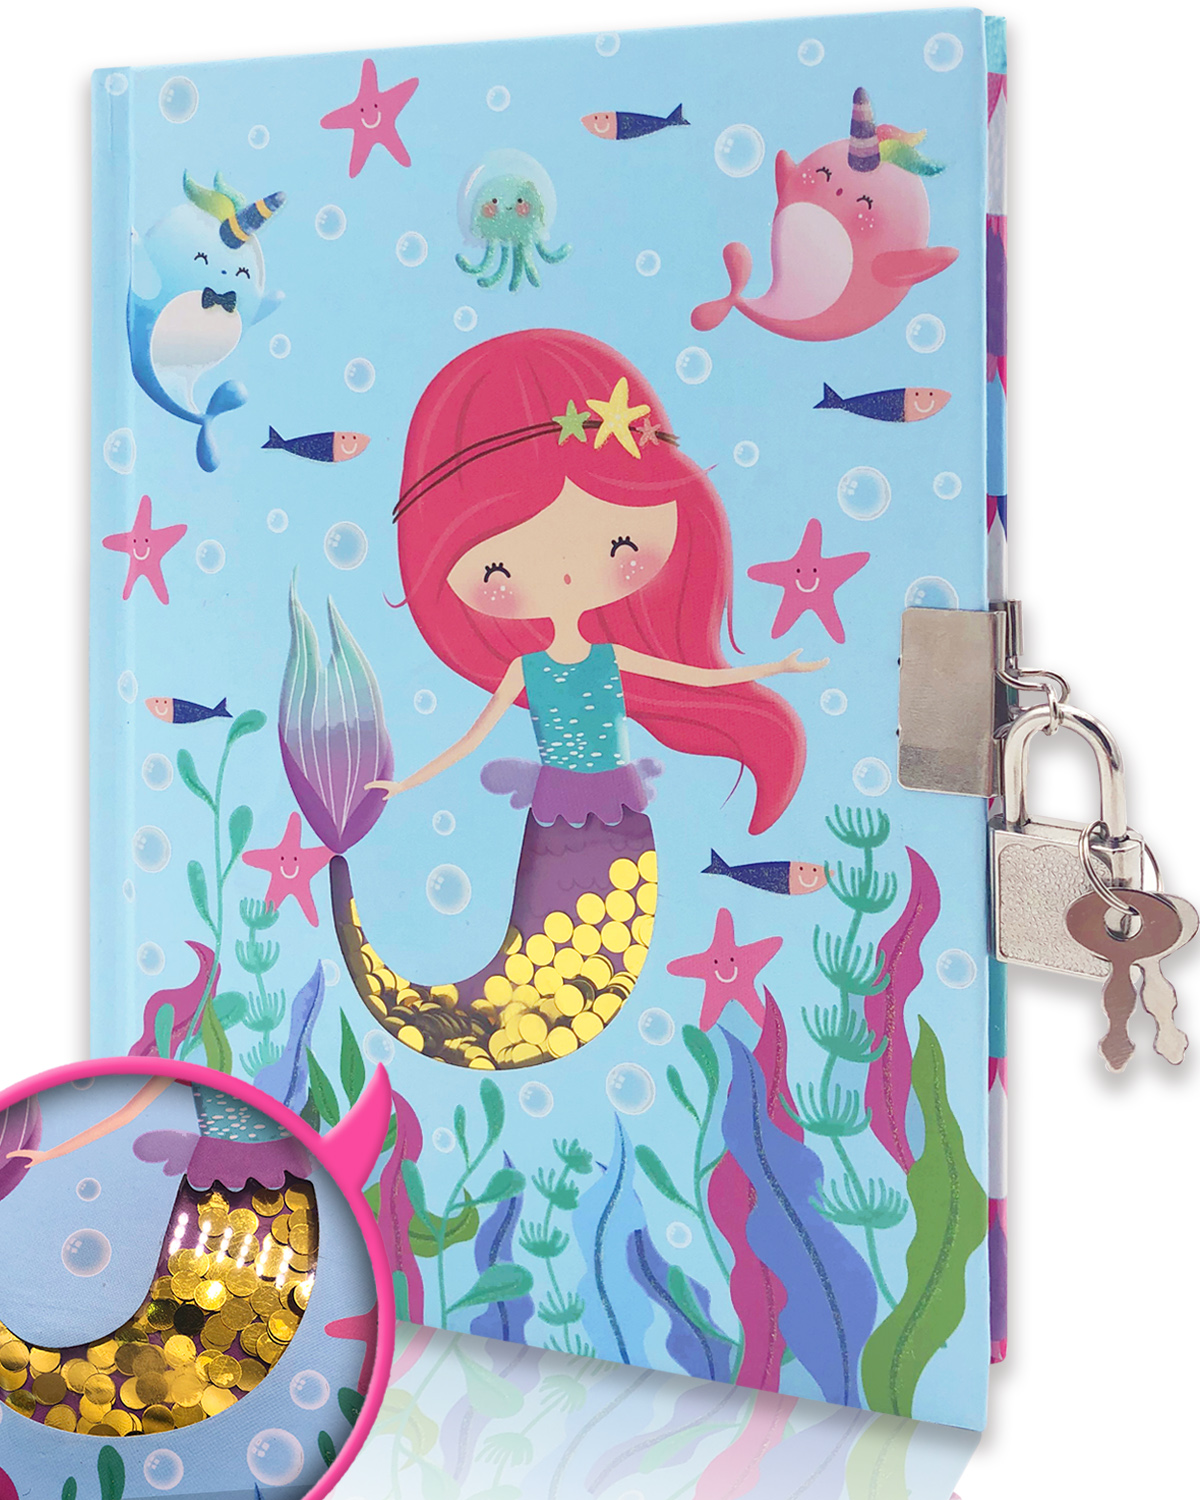 Girls Diary with Lock for Kids, GINMLYDA Mermaid Diaries 7.1x5.3 inch 160 Pages Girl Journal Secret Notebook with Lock and Key for Little Kid Writing